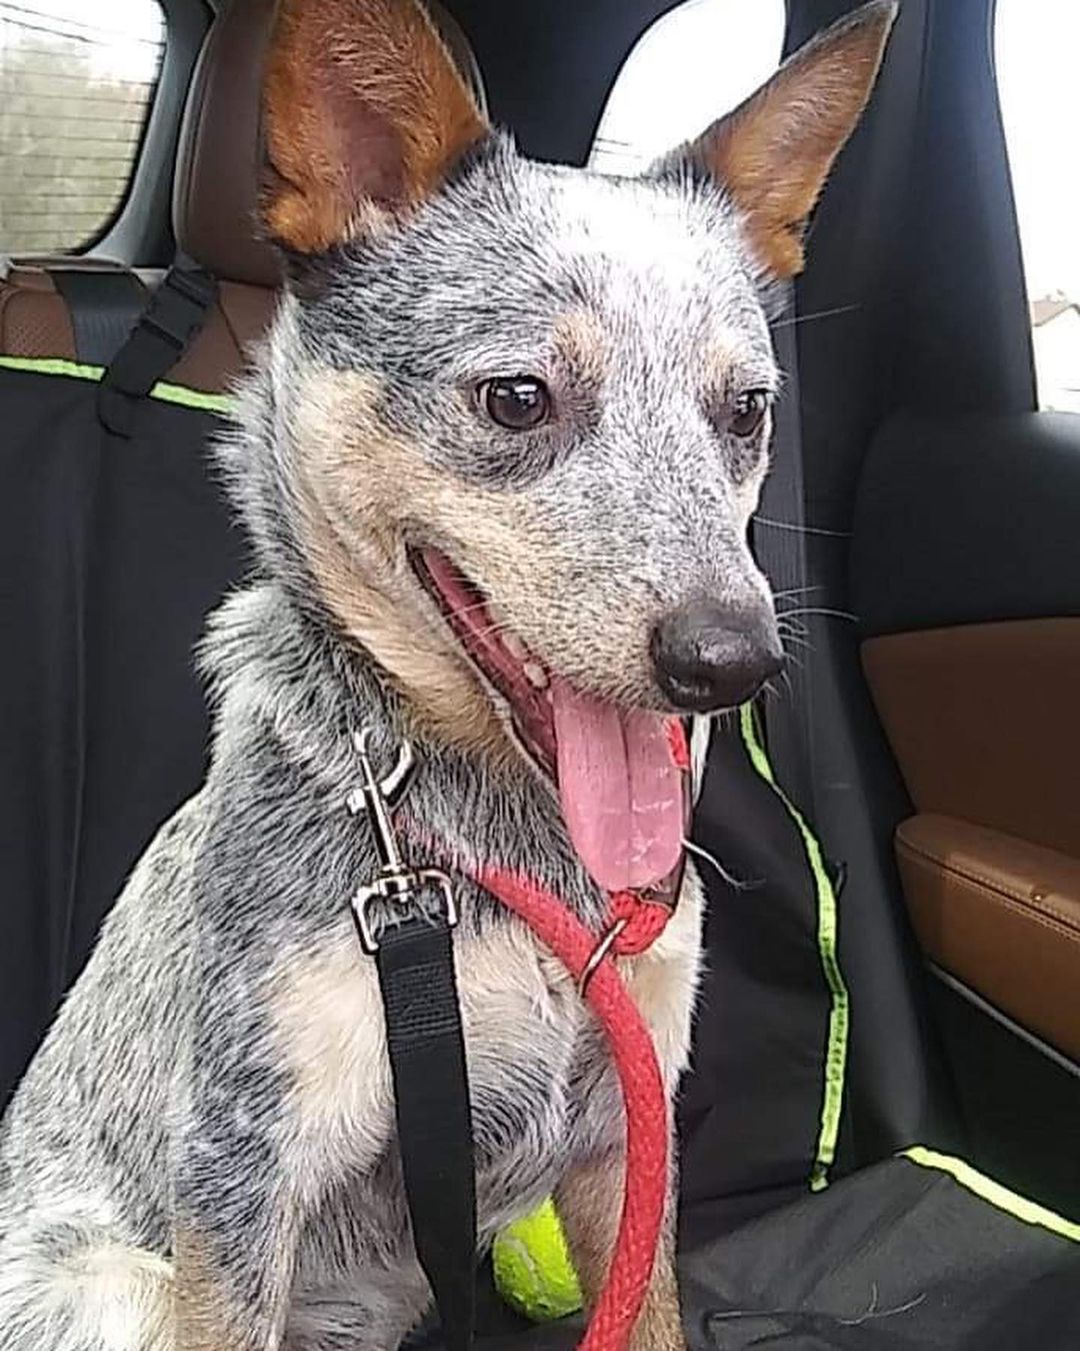 Pittsburgh, PA: meet Pluto! He is a 2 year old blue heeler & he is looking for a new home. His foster has been working on training with him for the past year and he has come really far! He is housebroken and crate trained, good with other dogs, unknown with cats so looking for a cat-free home. Would be best with older kids due to the breed & herding traits. 

Pluto is scheduled to be fixed in November. He is up to date on vaccines and a very healthy, energetic boy looking for a family!

Please let us know if anyone is interested - email PAunderdogmutts@gmail.com